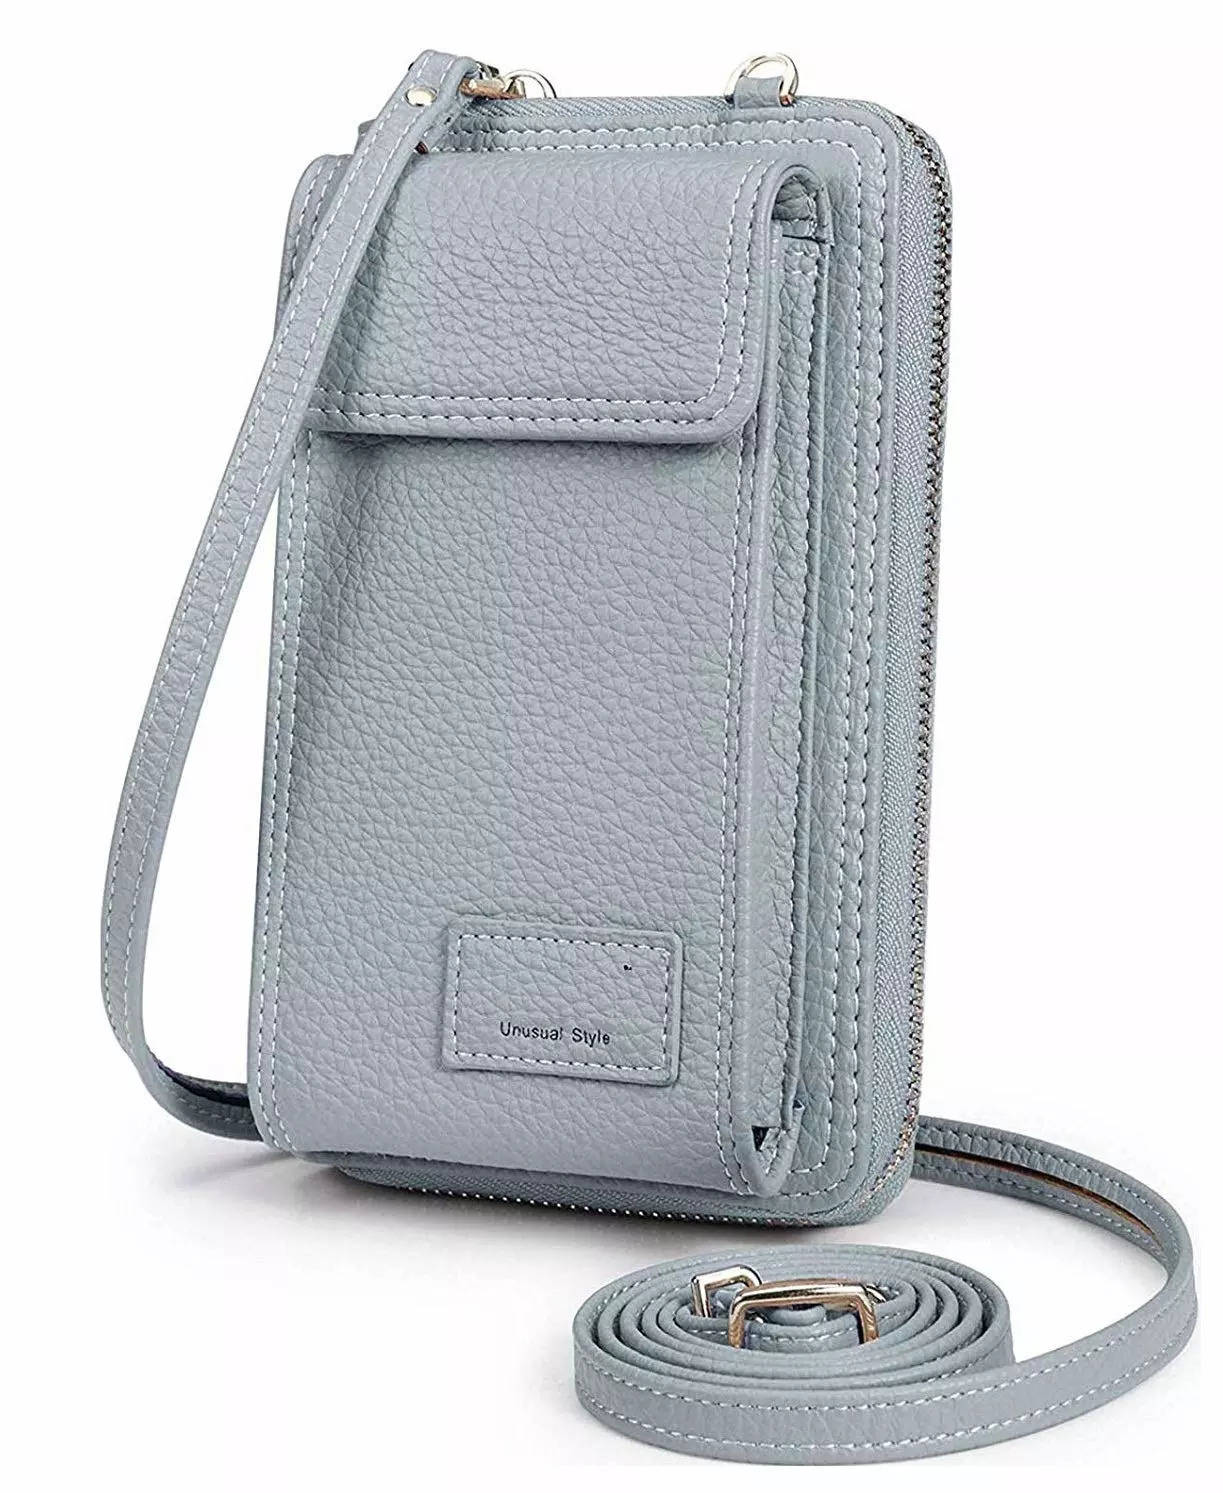 Fashion Leather Wallets Women Continental Zipper Purse For Ladies Designer  Jet Set Clutch Brand Coin Purses M188 Online From Topsportstore, $20.28 |  DHgate.Com